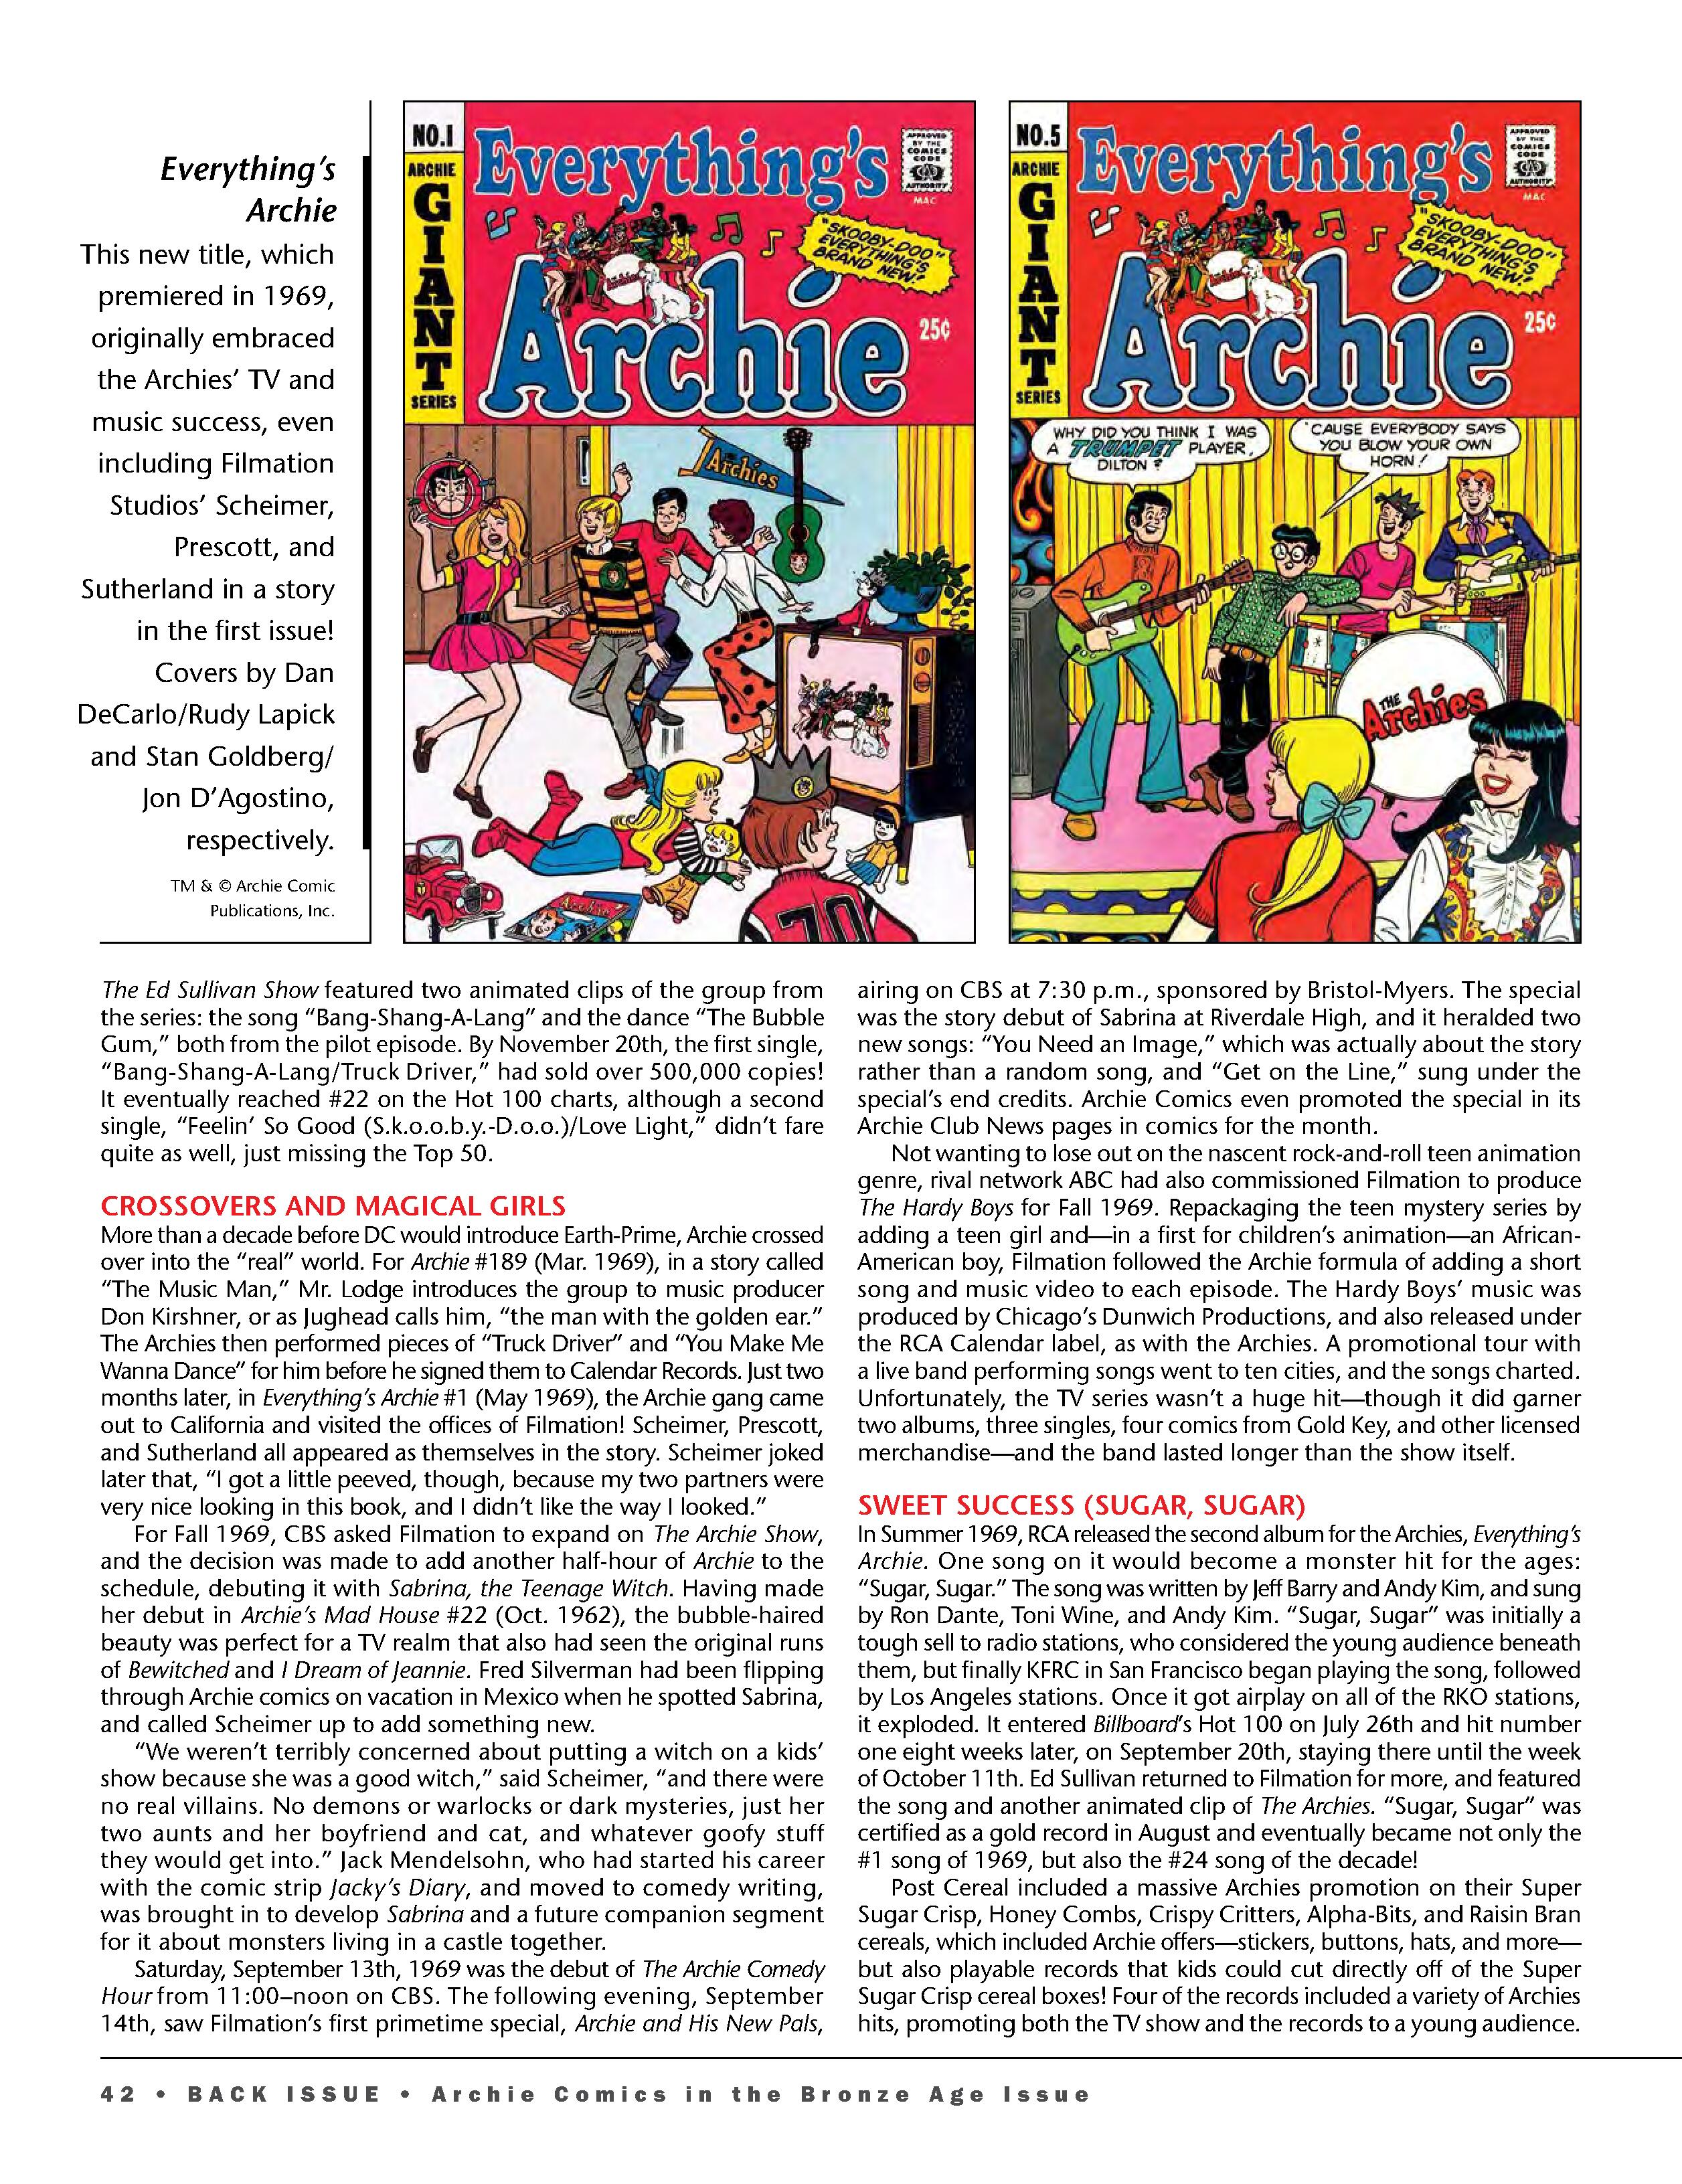 Read online Back Issue comic -  Issue #107 - 44